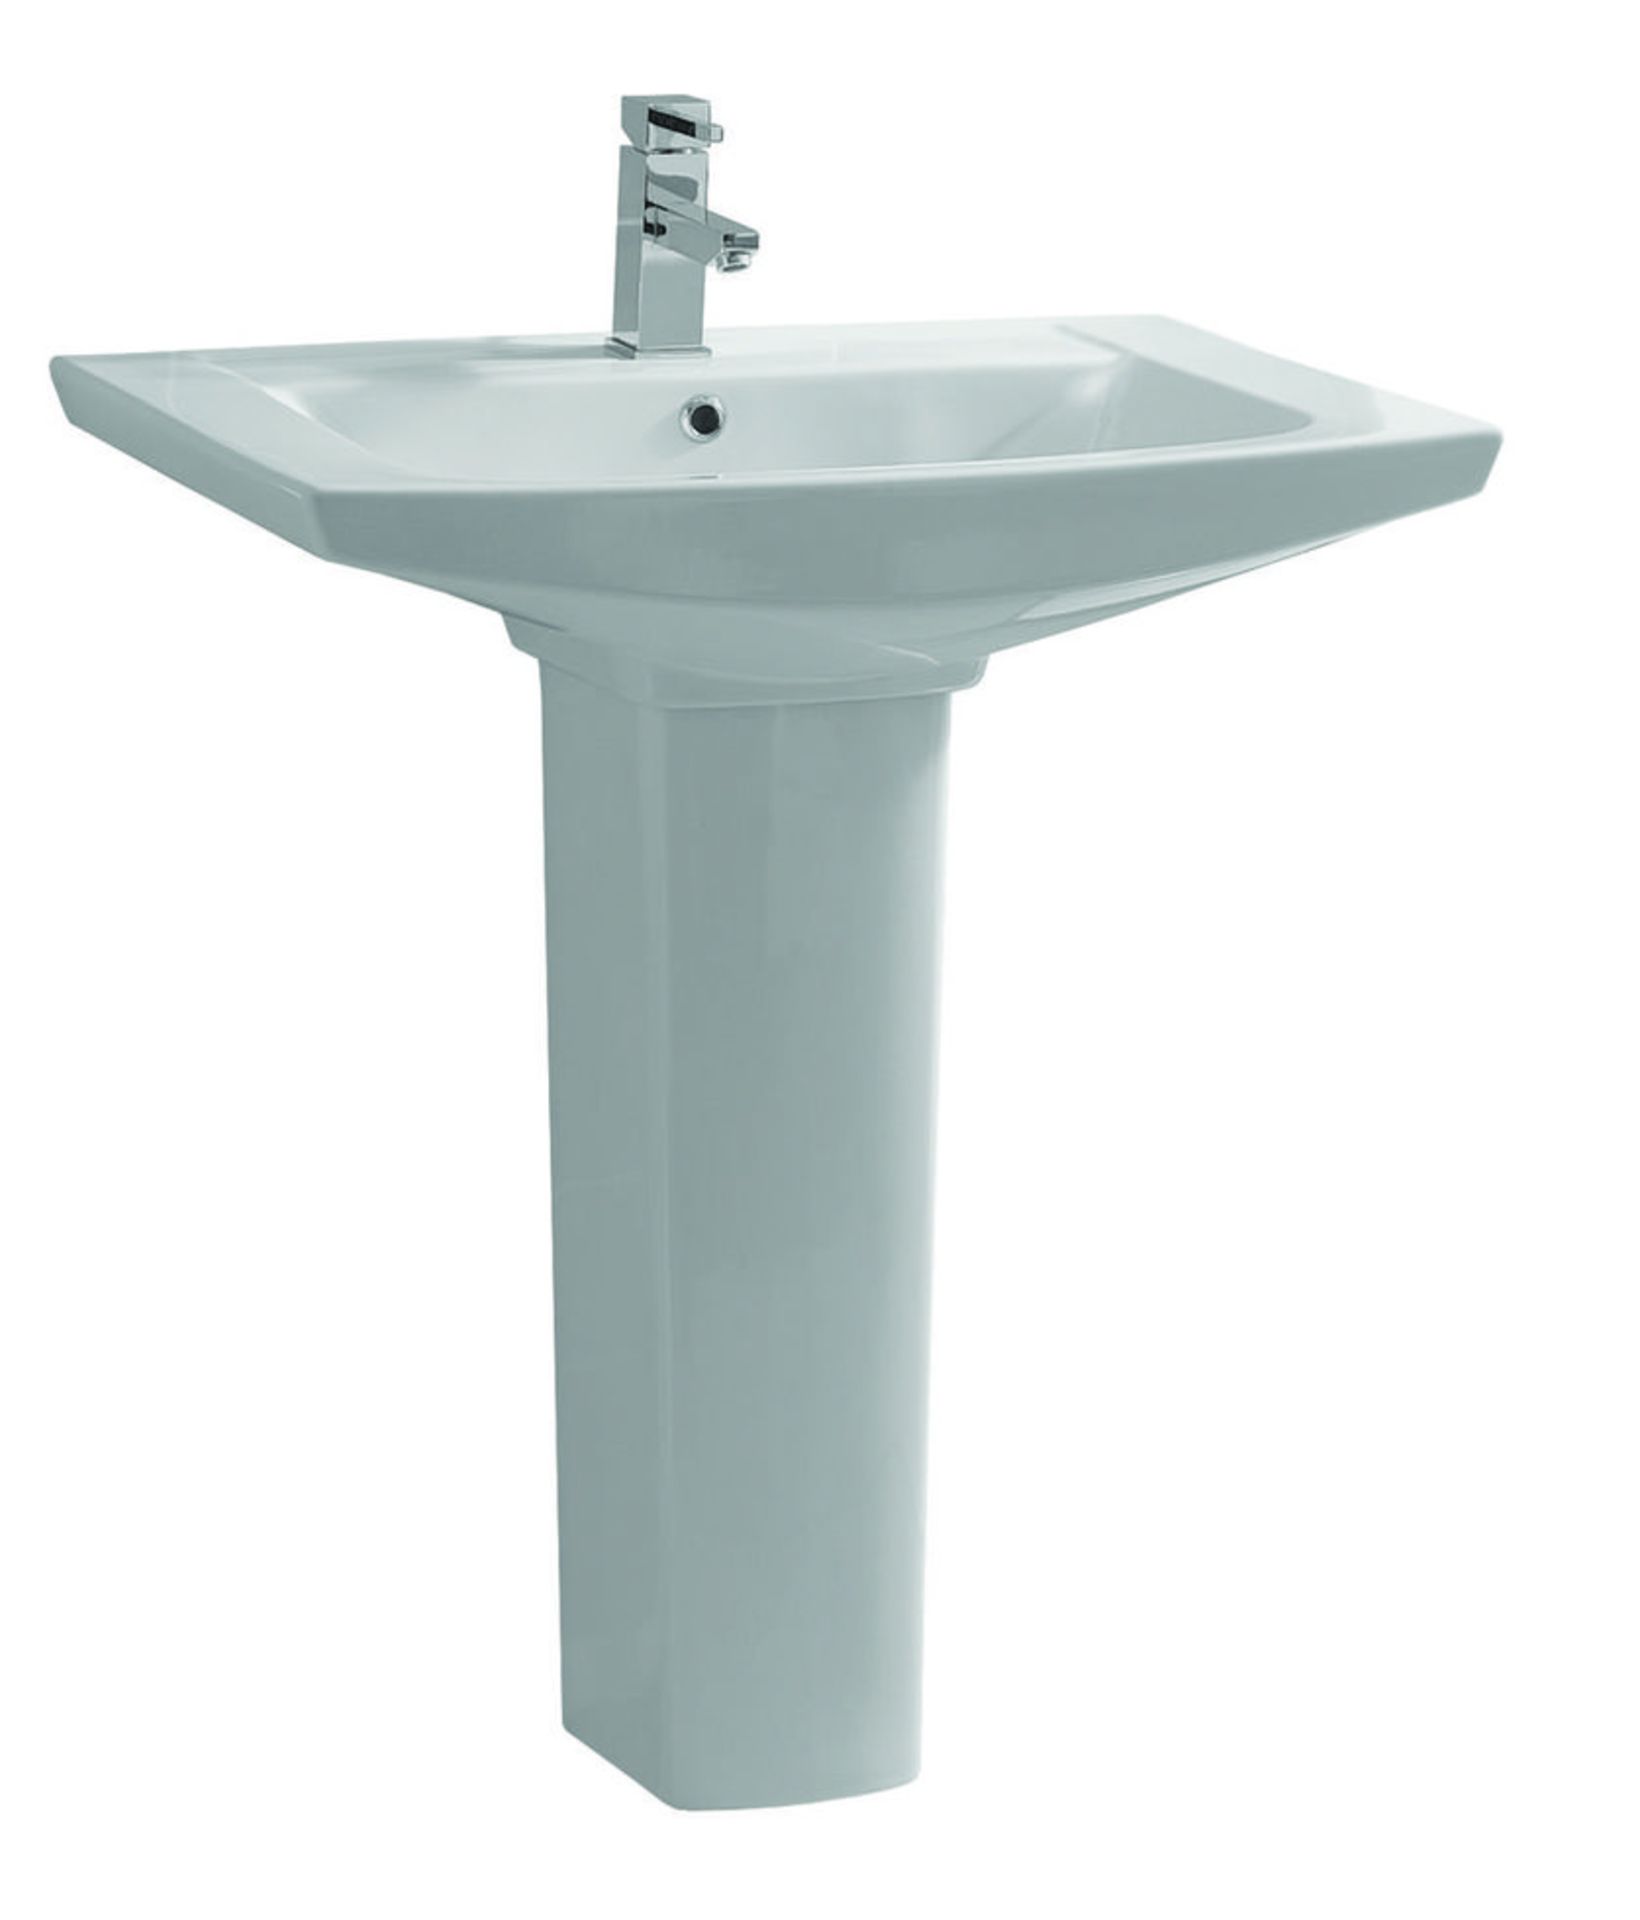 1 x Vogue Bathrooms CAPRICE Single Tap Hole SINK BASIN With Full Pedestal - Vogue Bathrooms - - Image 2 of 2